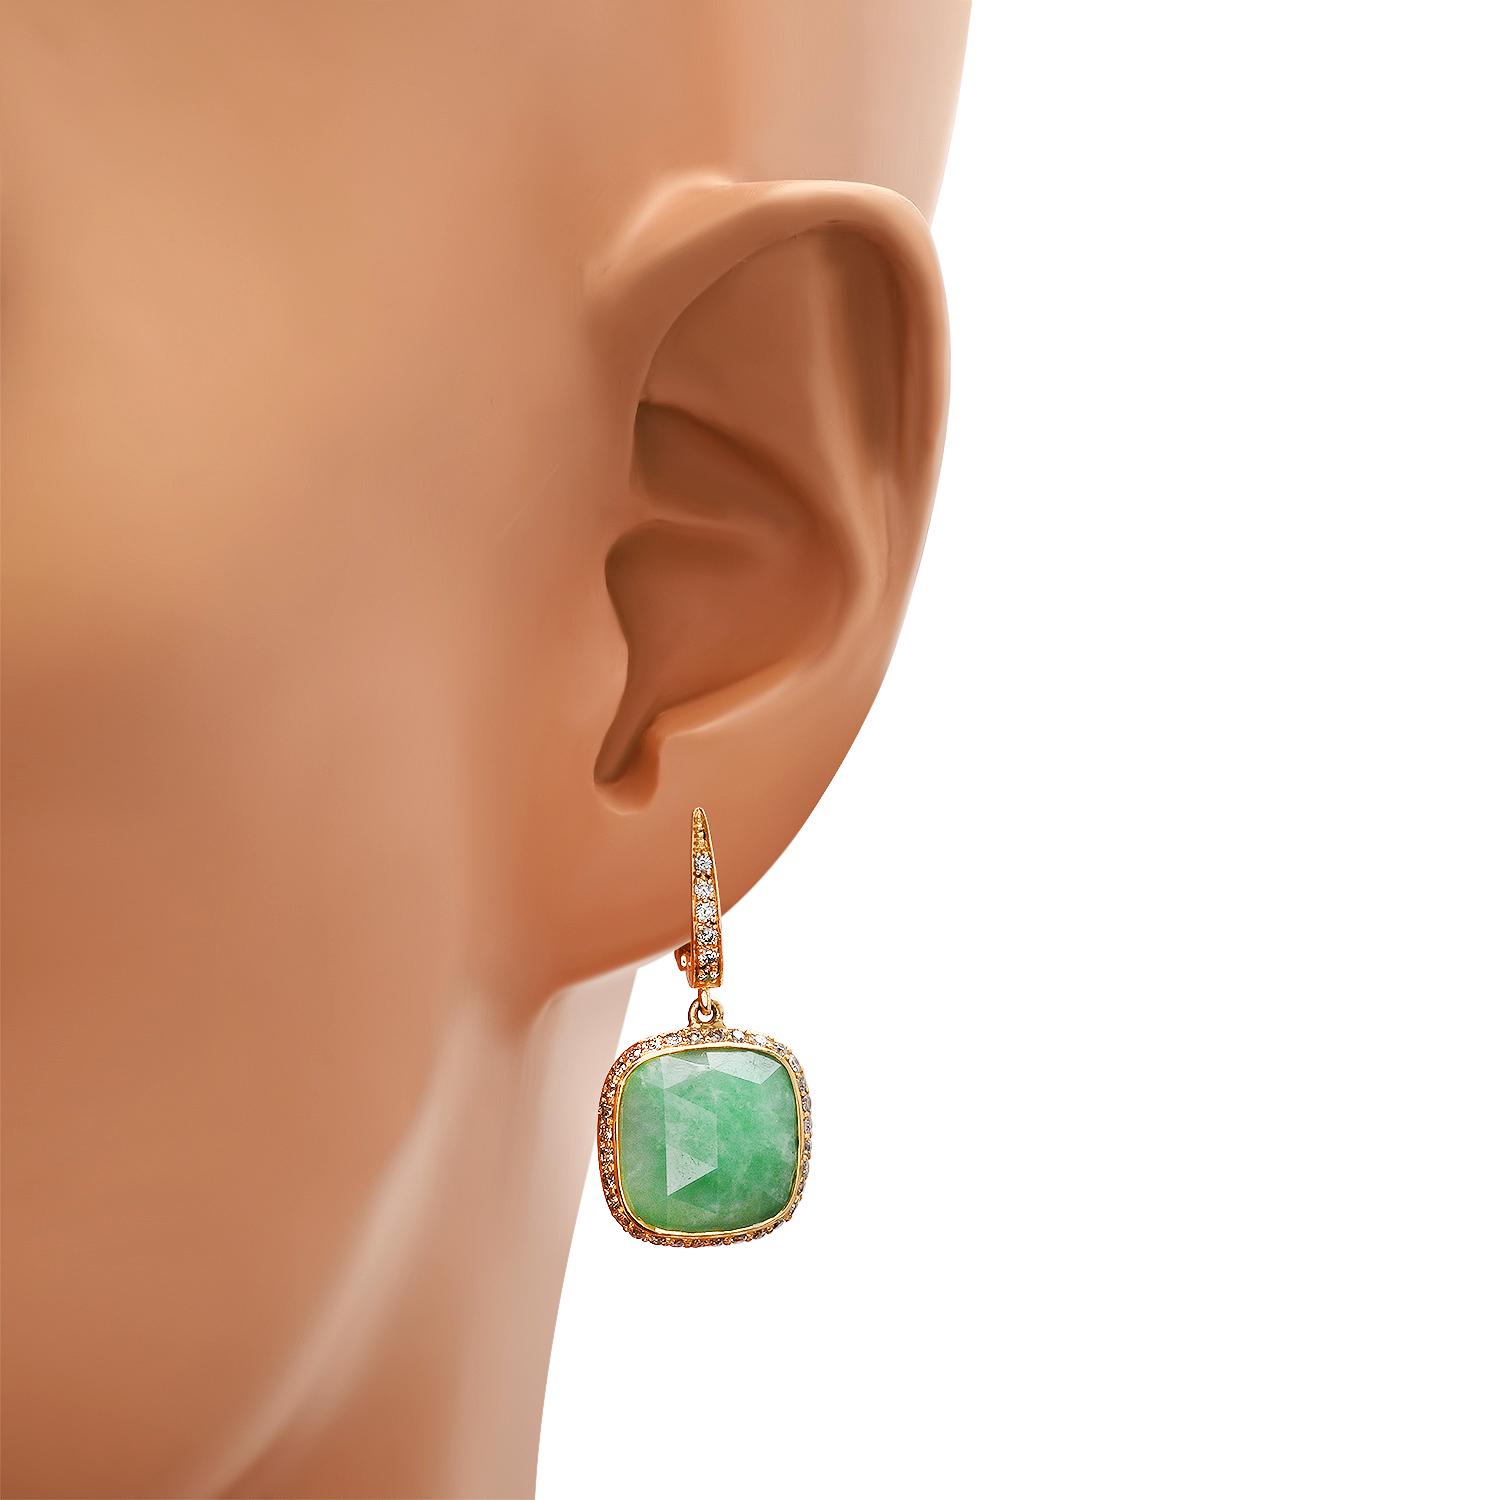 18K Yellow Gold Setting with 9.47ct Jadeite and 0.71ct Diamond Earrings